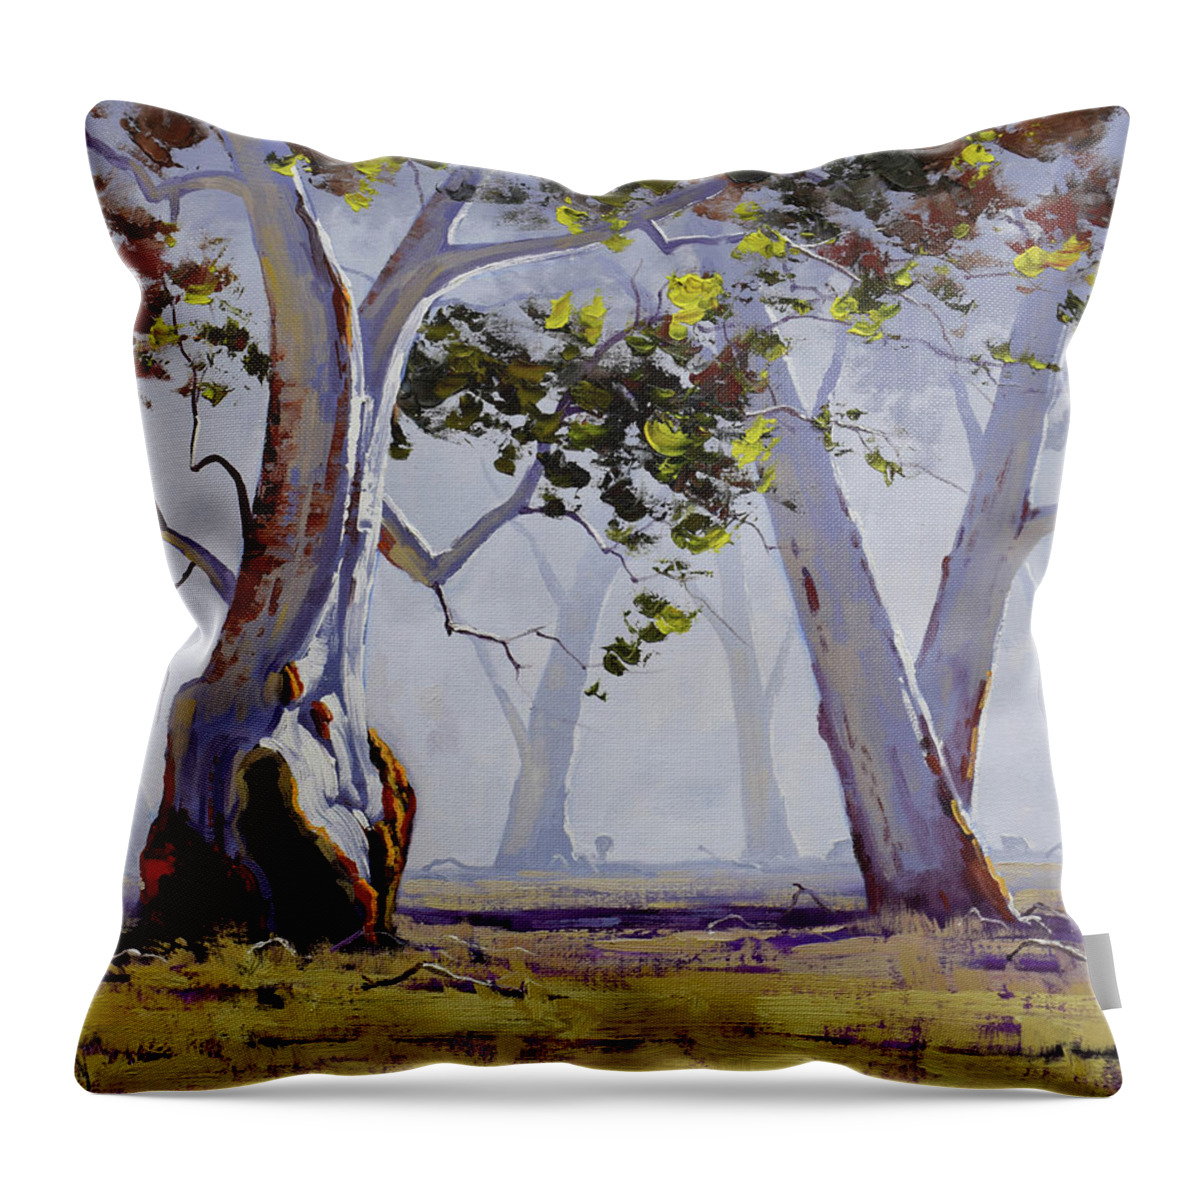 Misty Throw Pillow featuring the painting Misty Gums by Graham Gercken